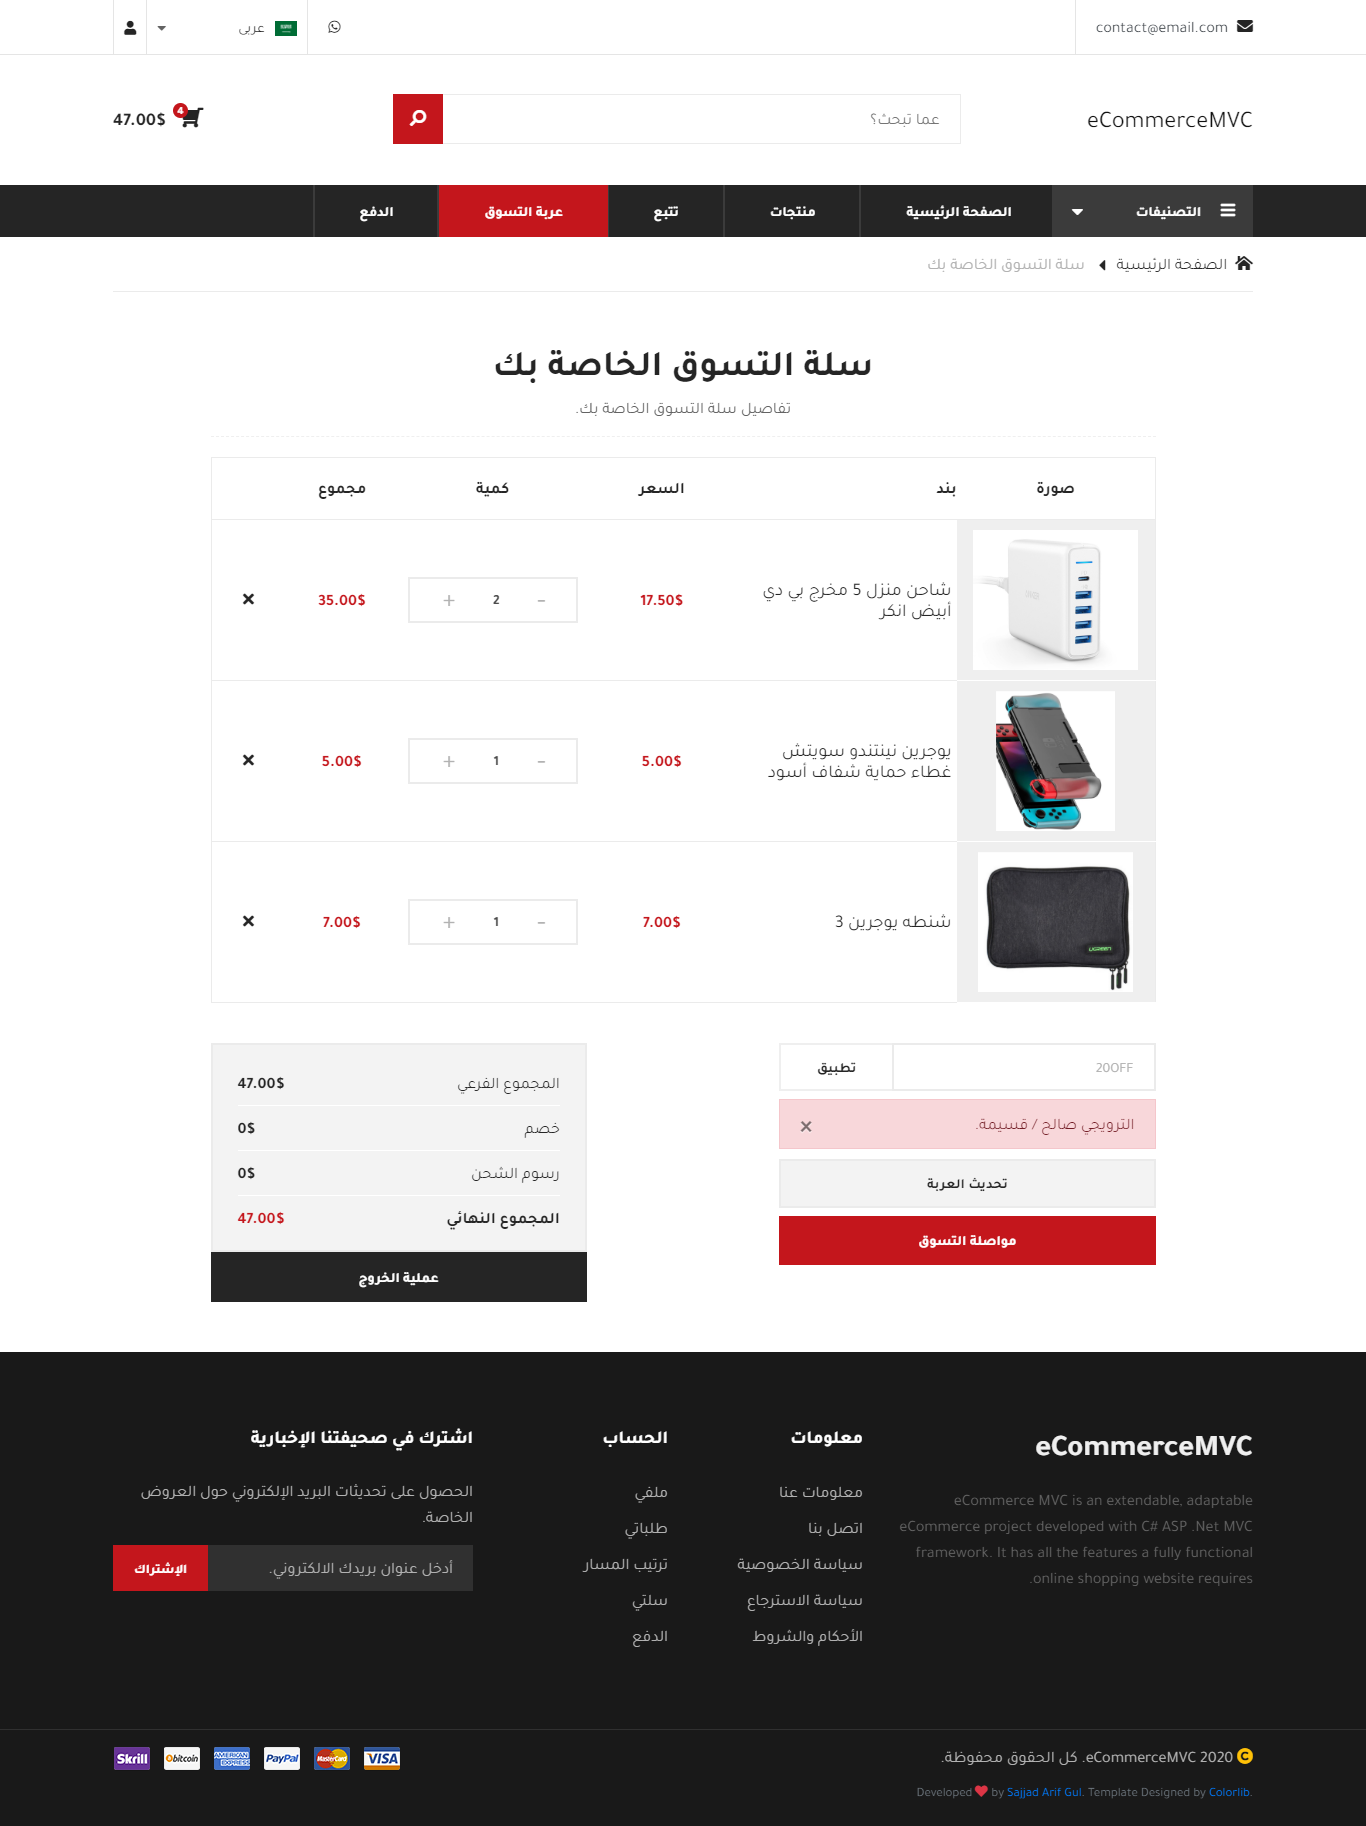 ecommerce-website-project-in-asp-net-mvc-c-ecommerce-mvc-by